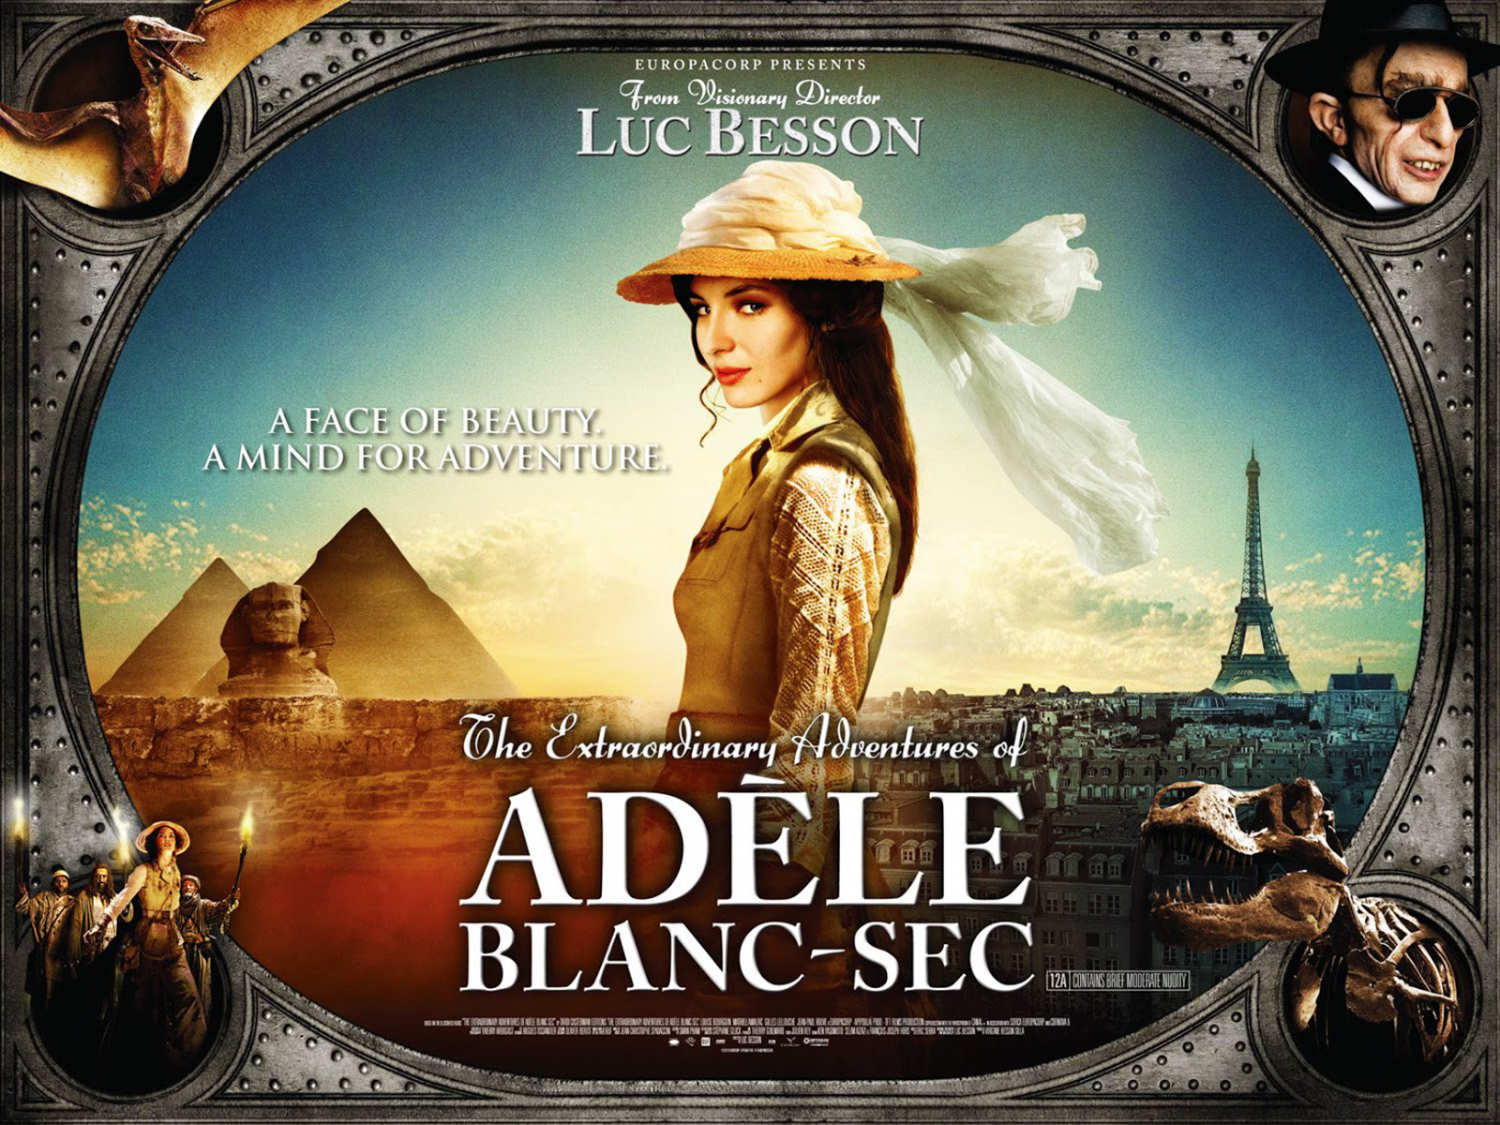 You are currently viewing Notes On A Film: The Extraordinary Adventures of Adèle Blanc-Sec